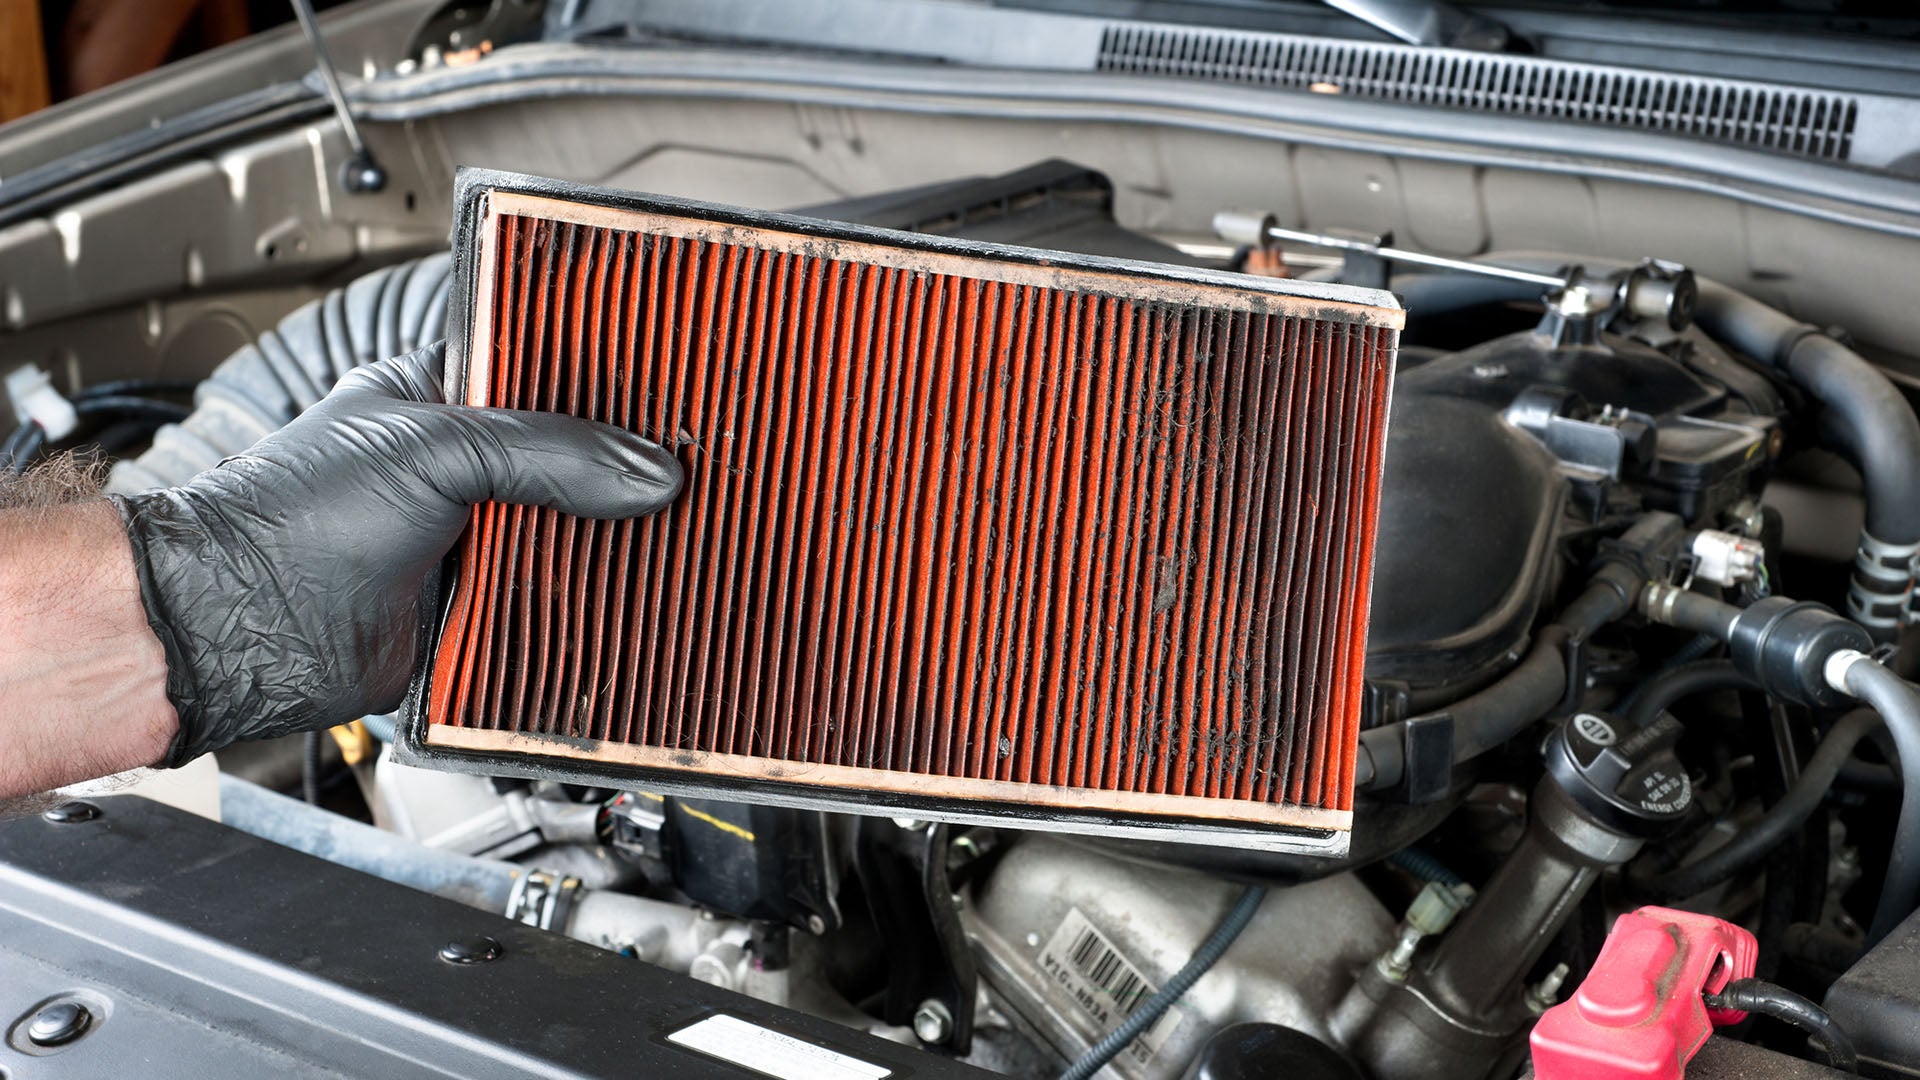 Always inspect the air filter inside and outside of your vehicle.